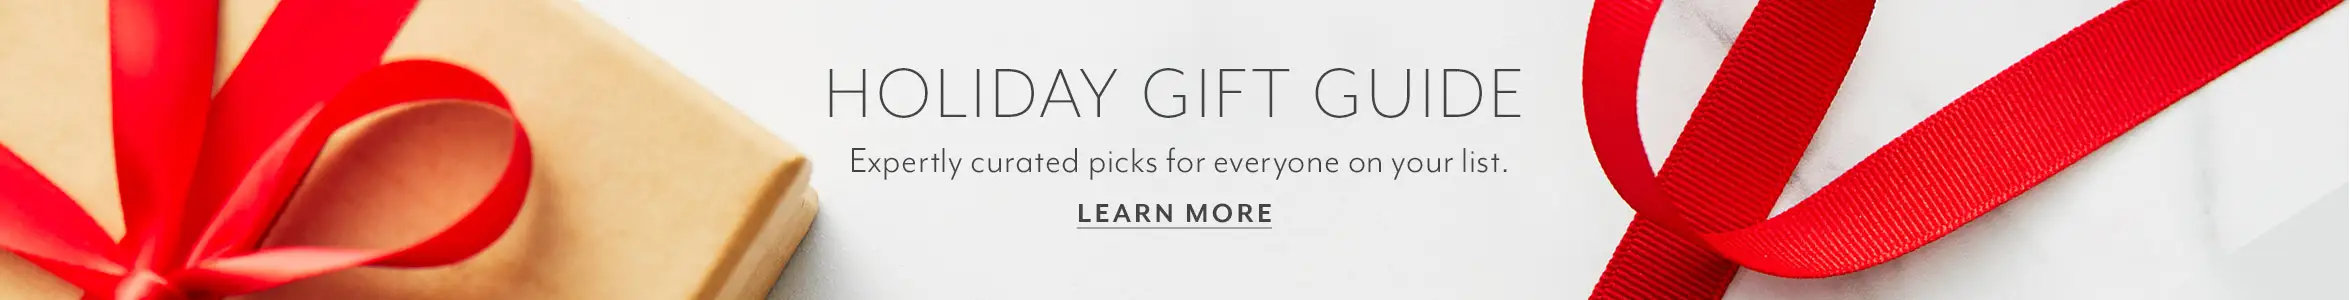 Holiday Gift Guide. Expertly curated picks for everyone on your list. Learn More.